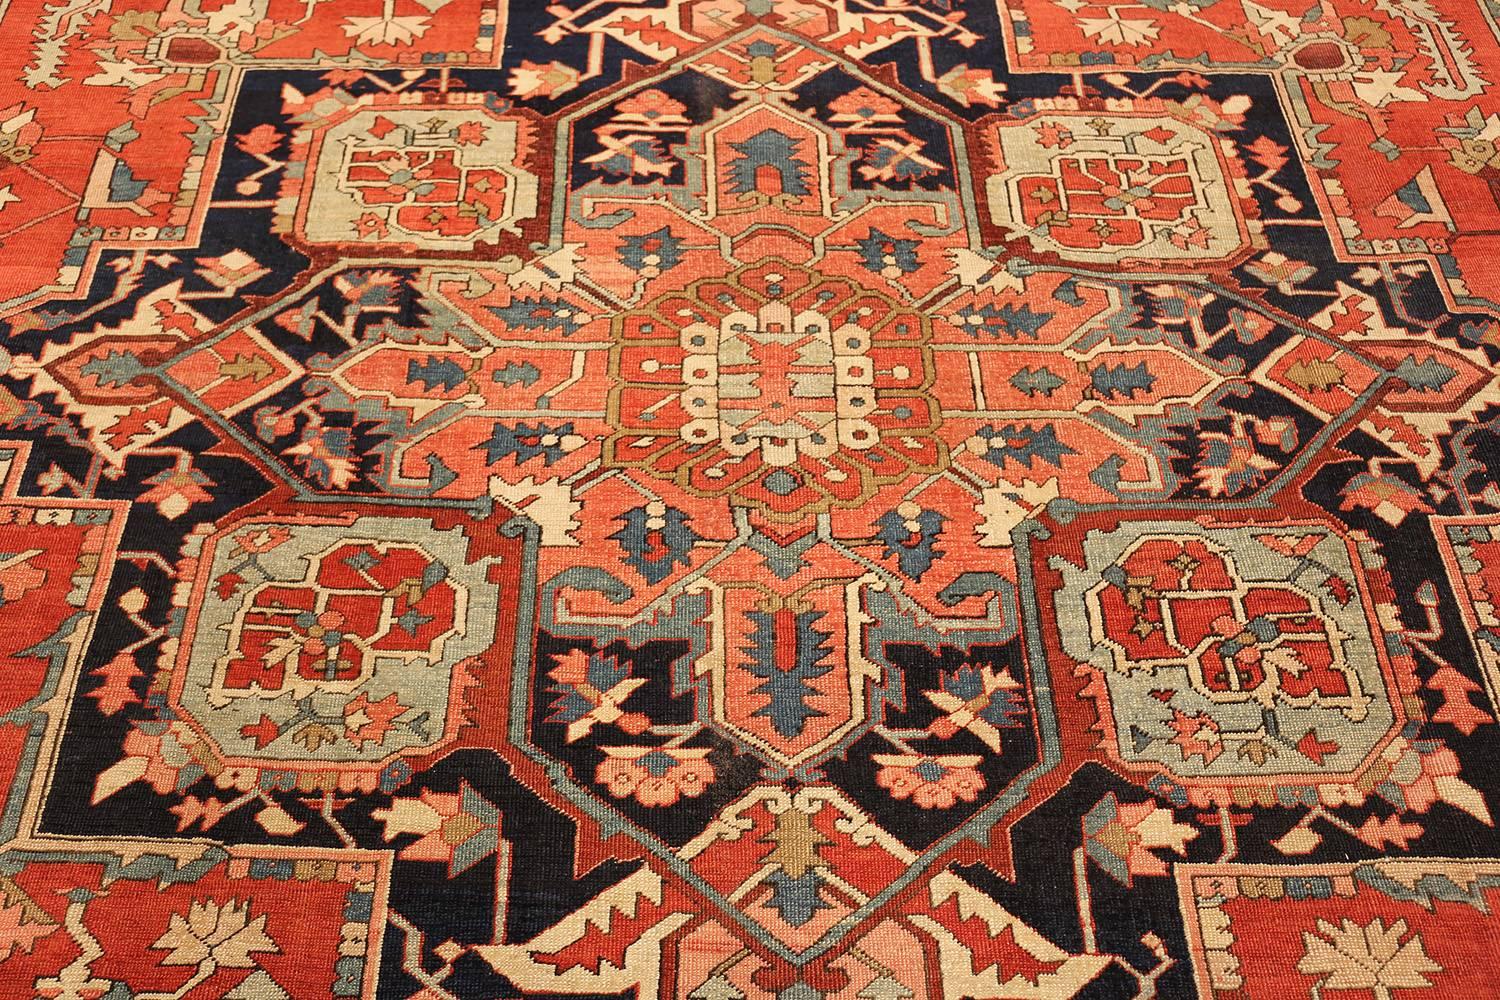 Antique Serapi Persian Rug. Size: 10 ft 4 in x 13 ft 6 in (3.15 m x 4.11 m) 1